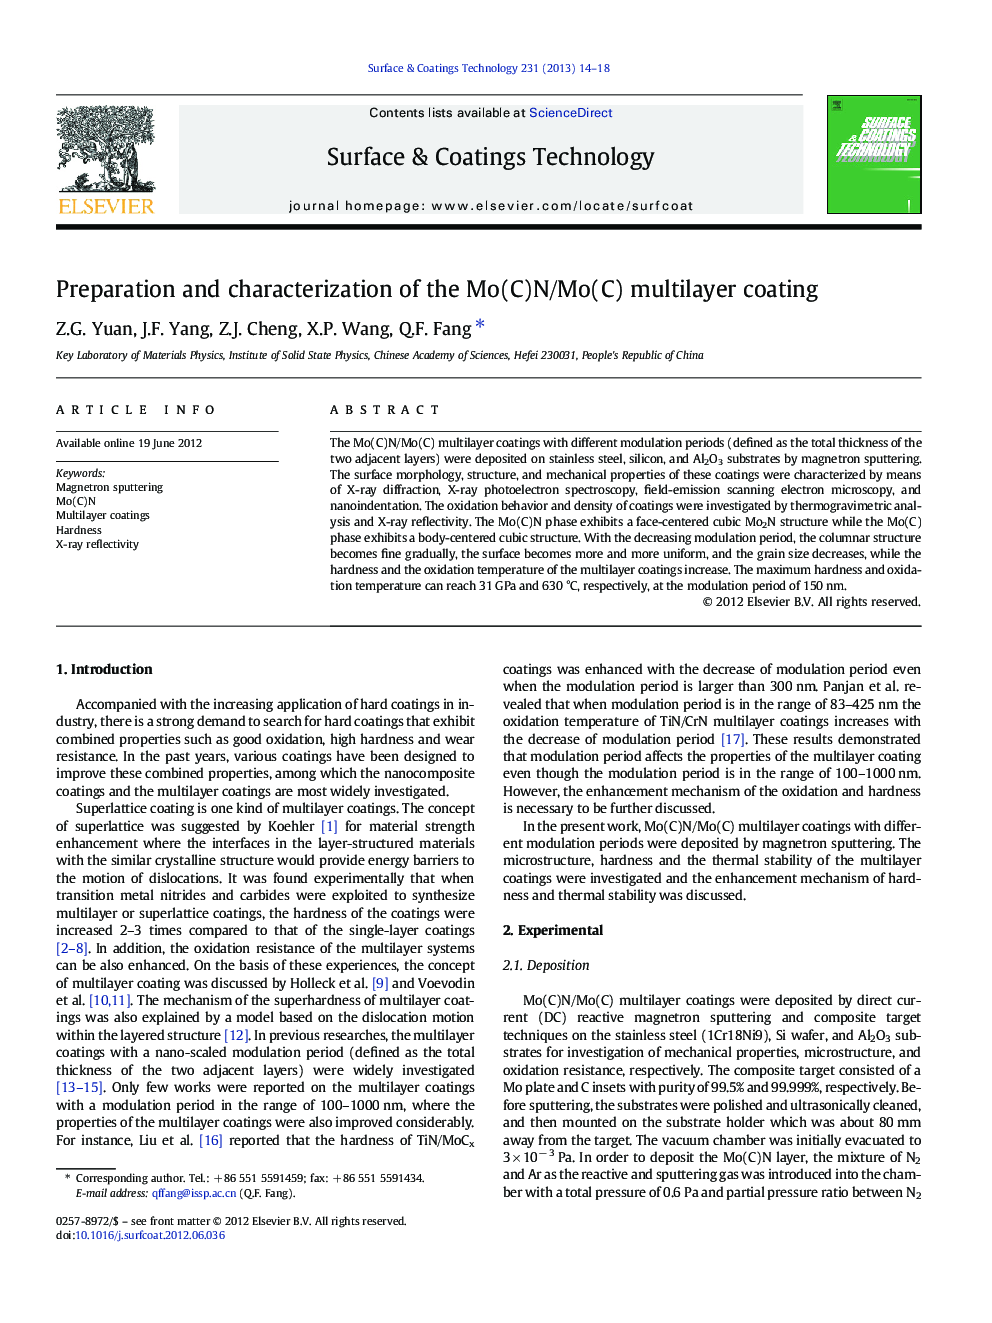 Preparation and characterization of the Mo(C)N/Mo(C) multilayer coating